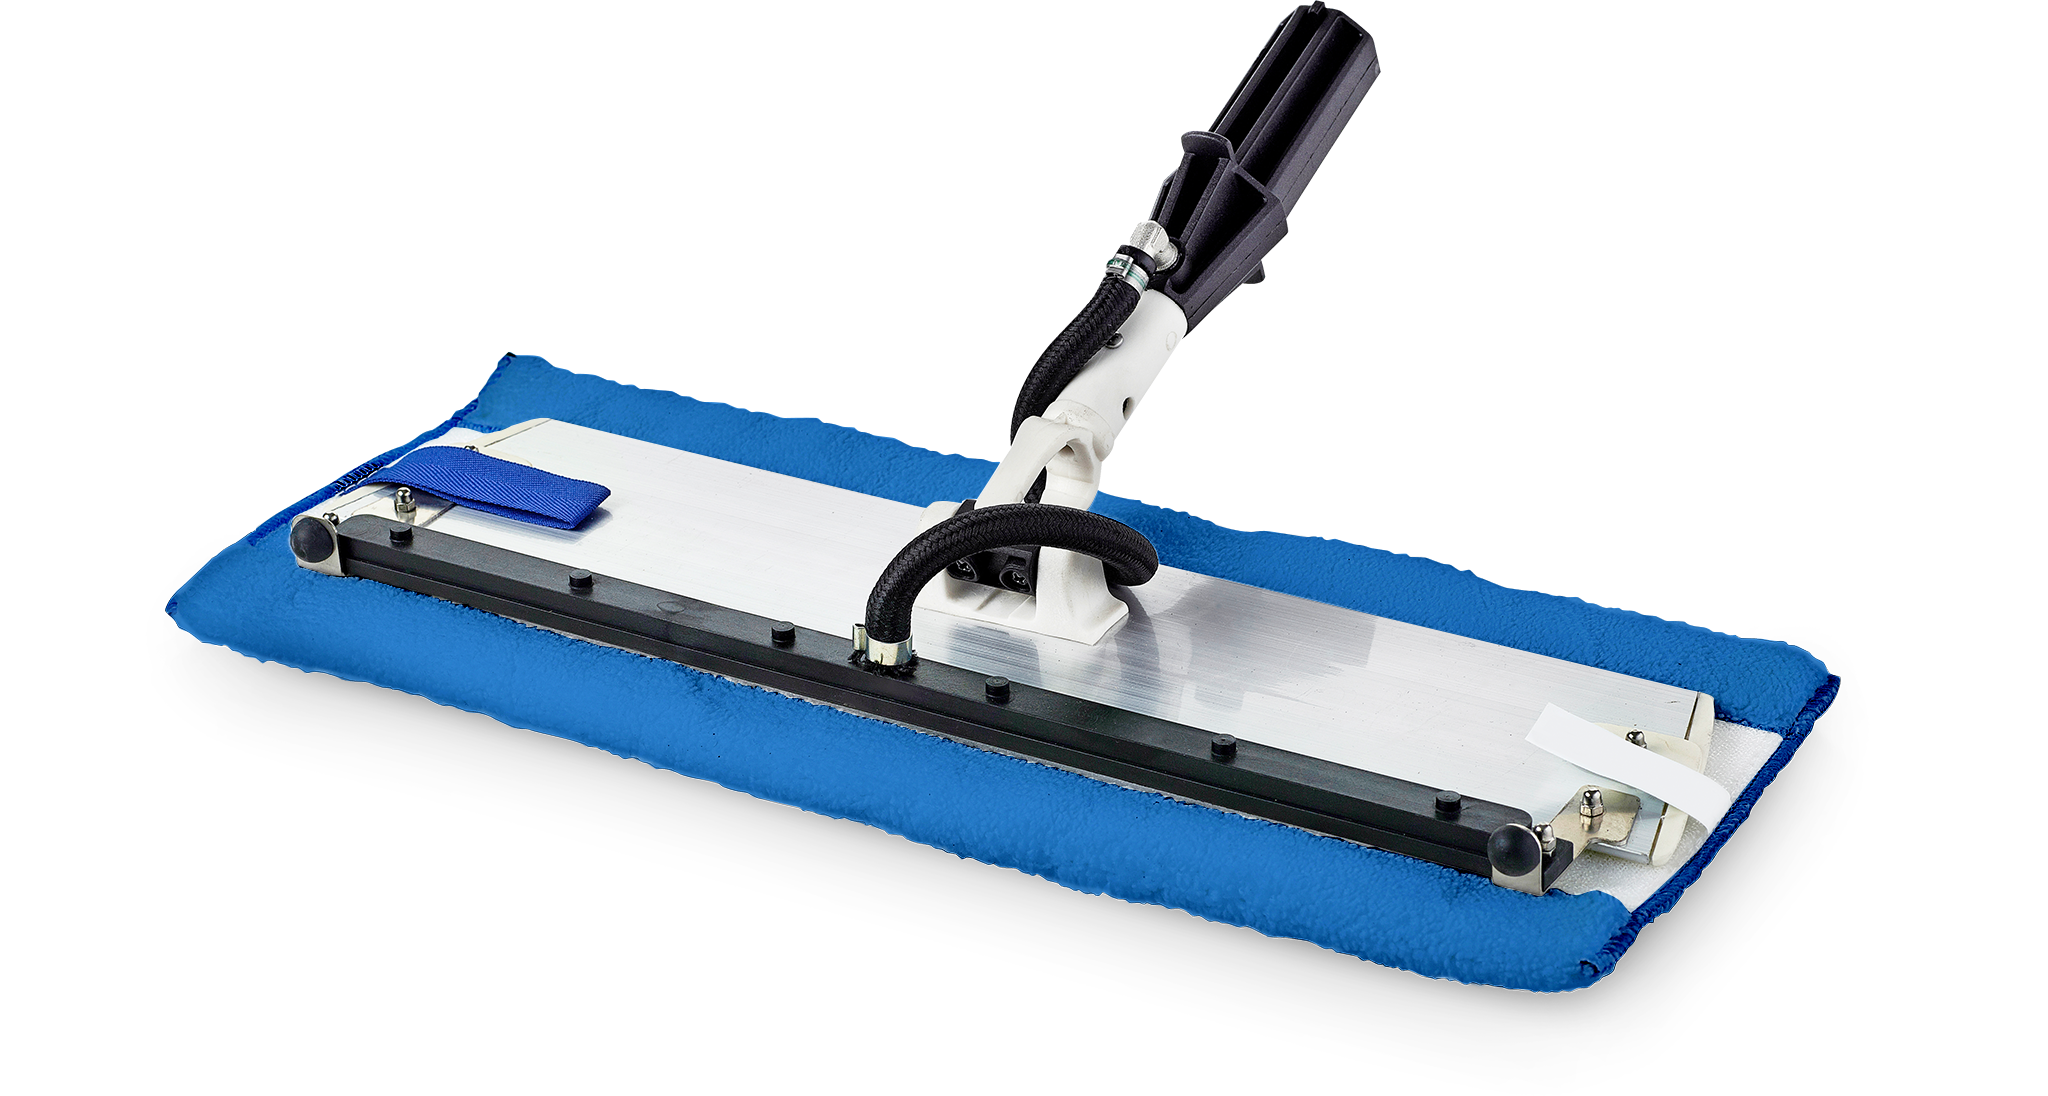 The Dupray SteamMop™ is perfect to clean floors, walls, and